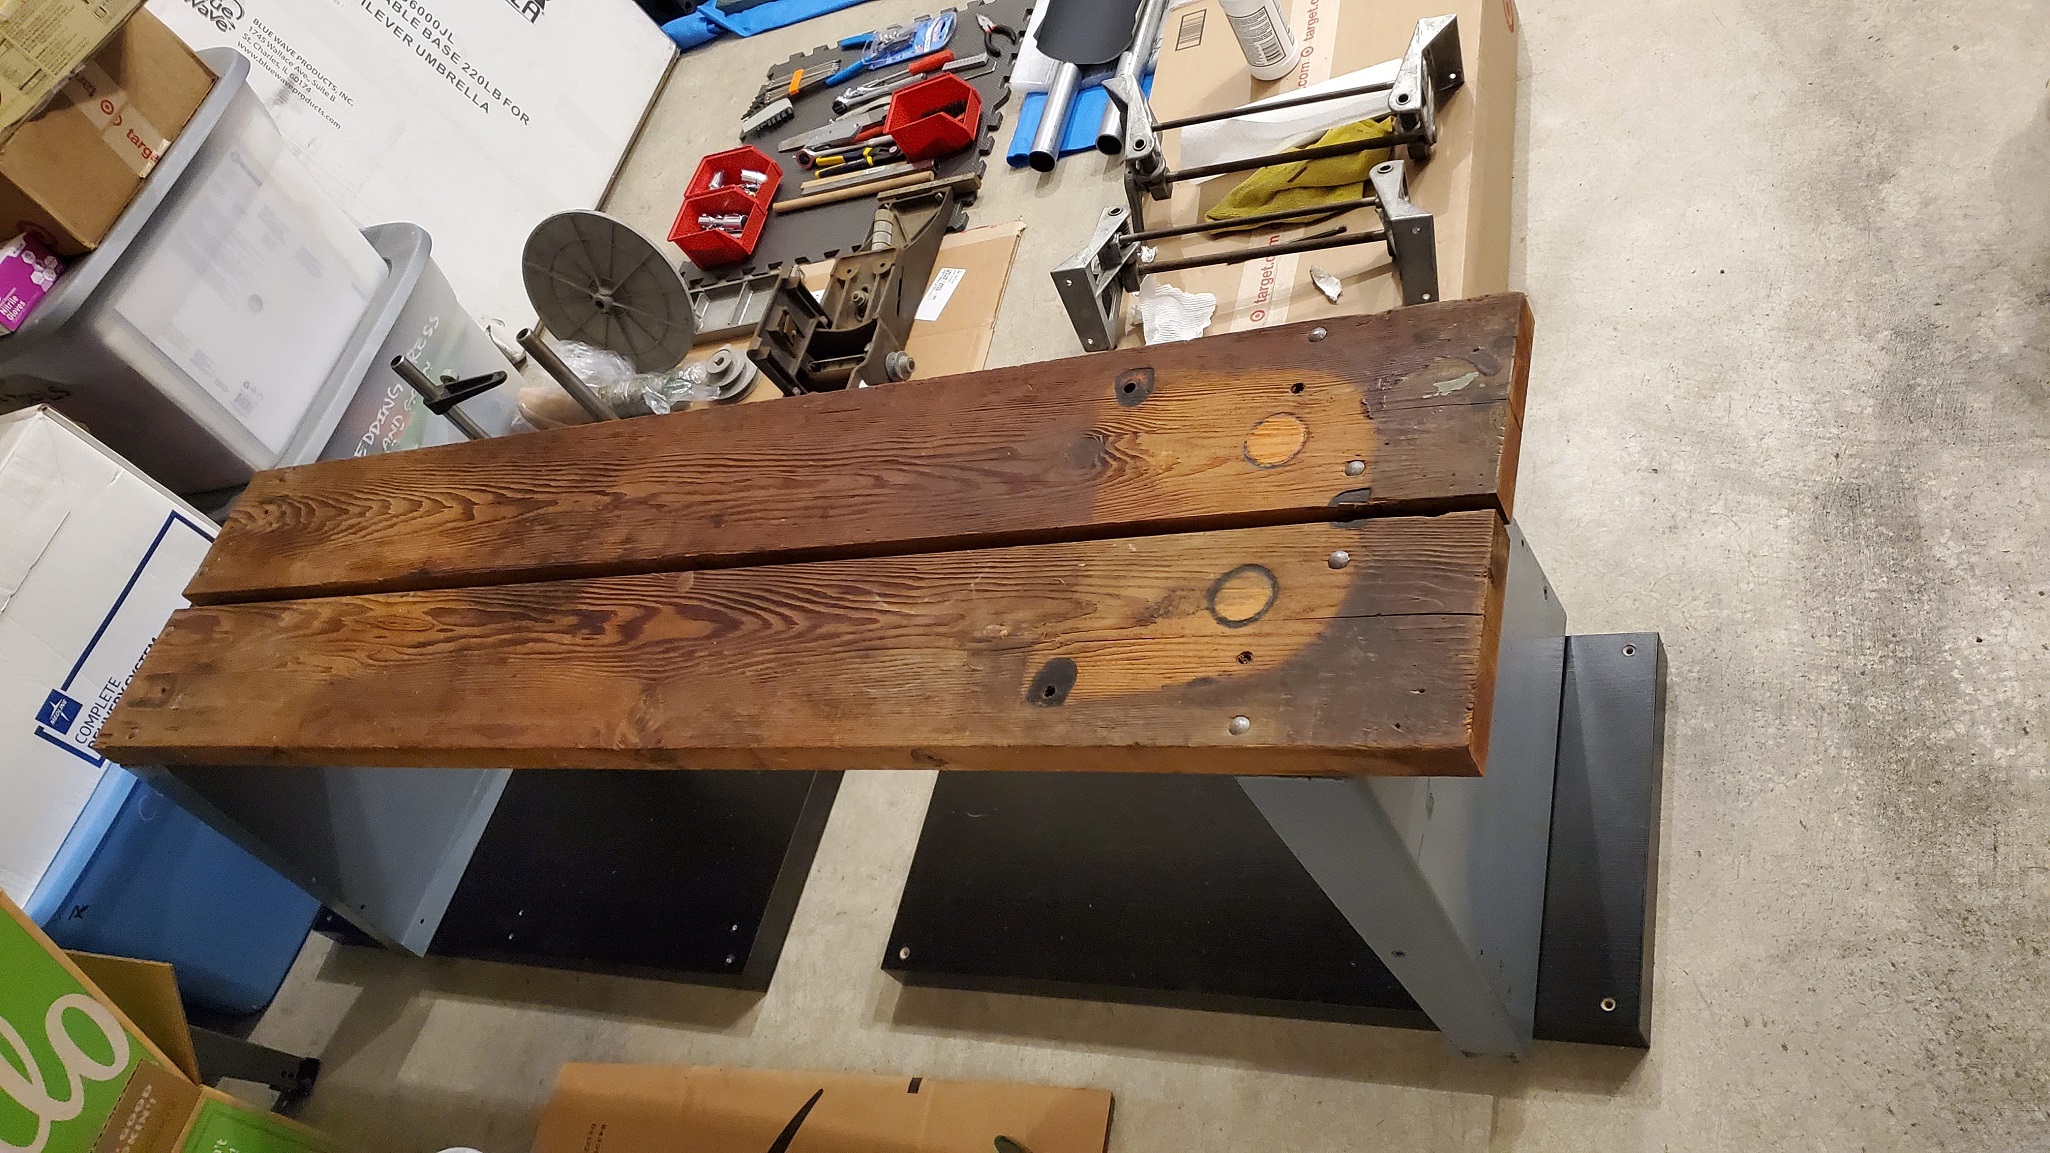 Cleaned/waxed the bench legs and cut ~1/2&quot; off the longer board.  Also had to move two angle brackets location on the board, so they all have the same offset from the legs.